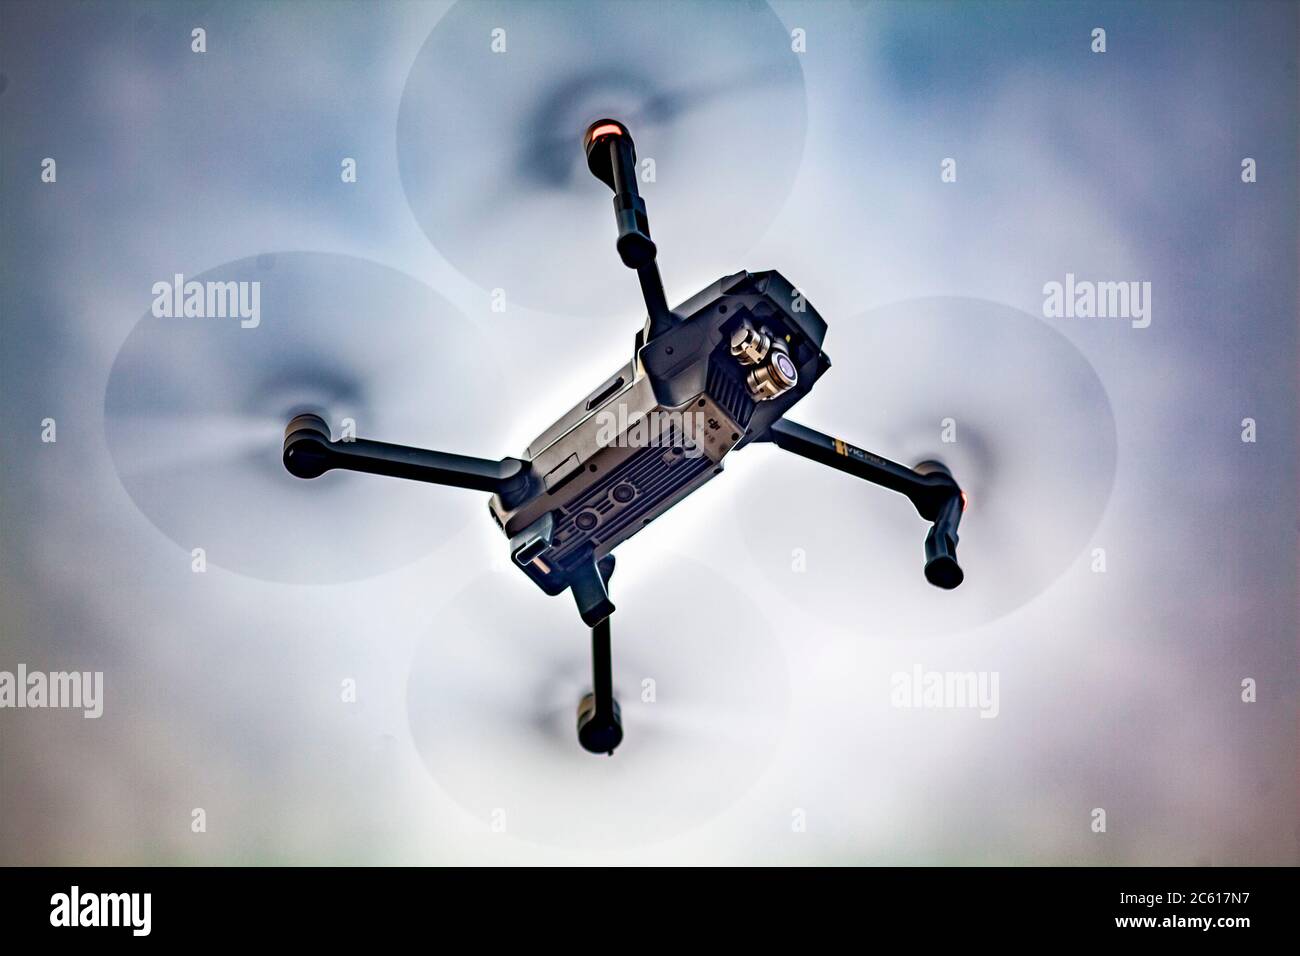 Close up of a wifi enabled, recreational DJI Mavic Pro Aerial 4K Camera Drone Quadcopter flying low overhead. Stock Photo